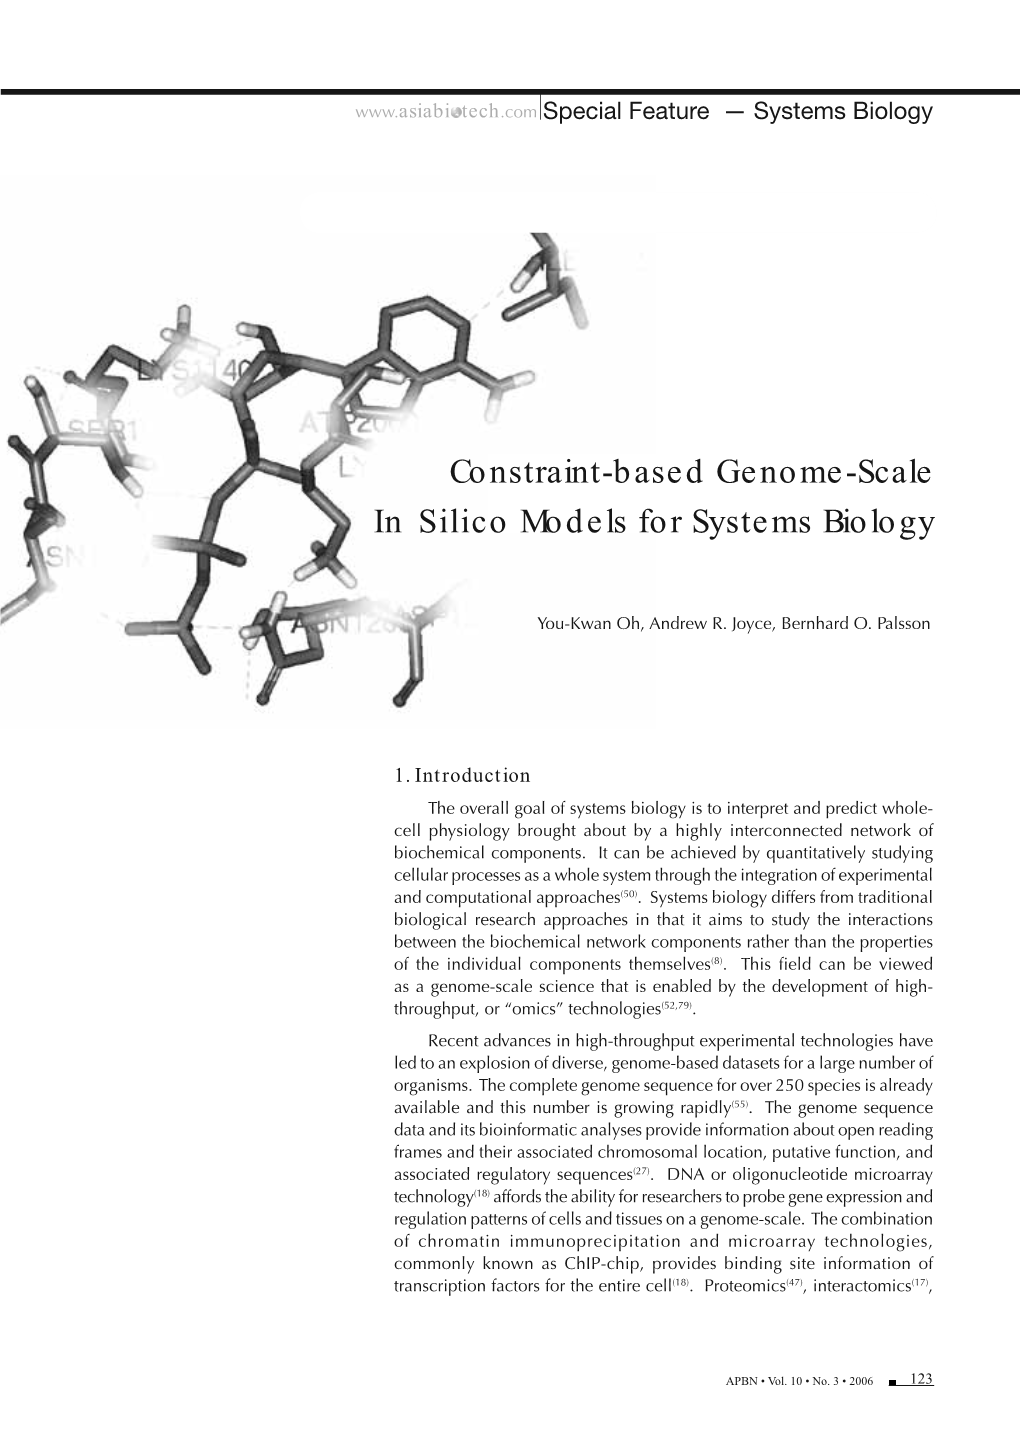 Constraint-Based Genome-Scale in Silico Models for Systems Biology